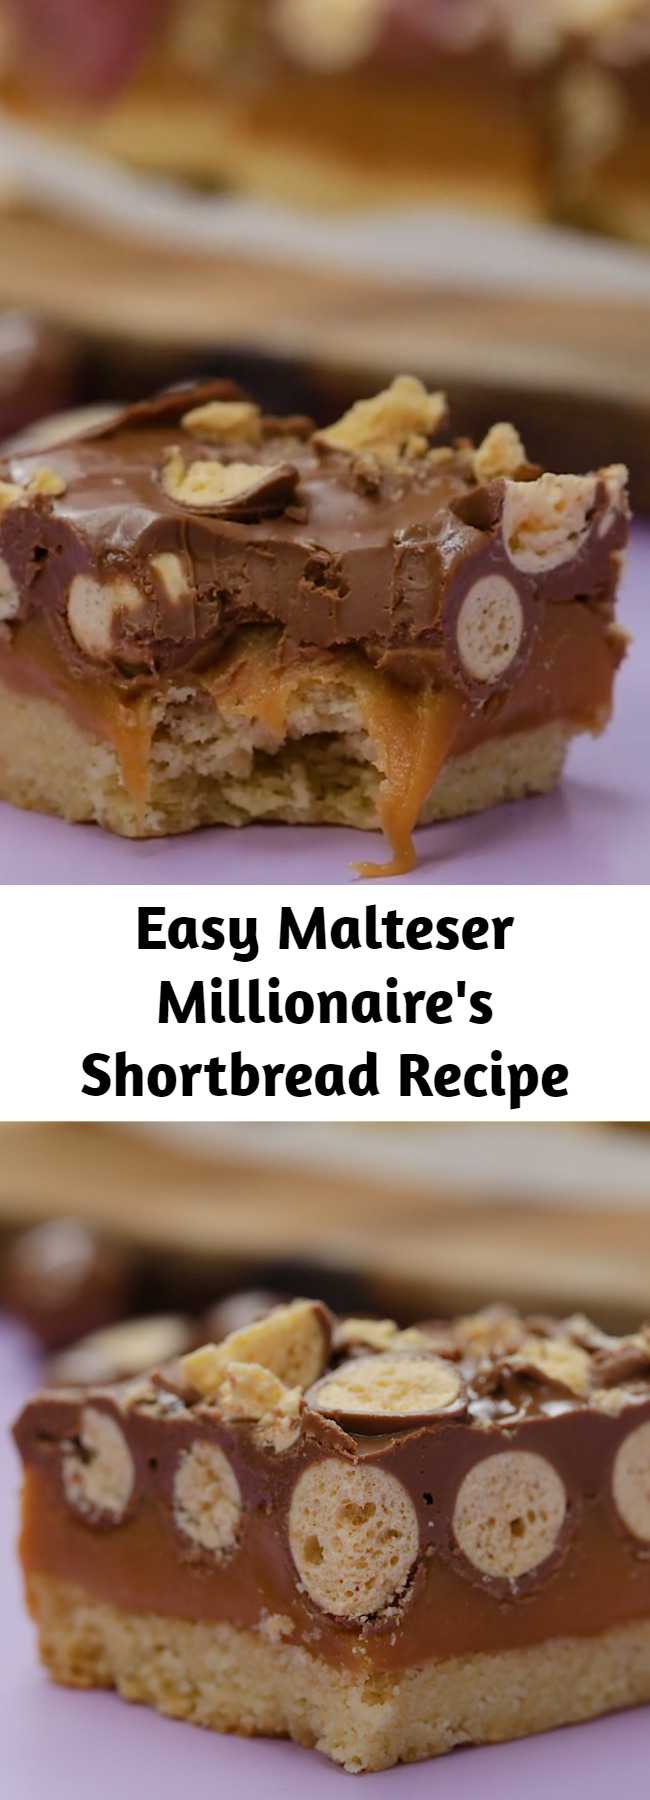 Easy Malteser Millionaire's Shortbread Recipe - To all the Malteser fan out there, this is a next level Malteser Millionaire Shortbread!